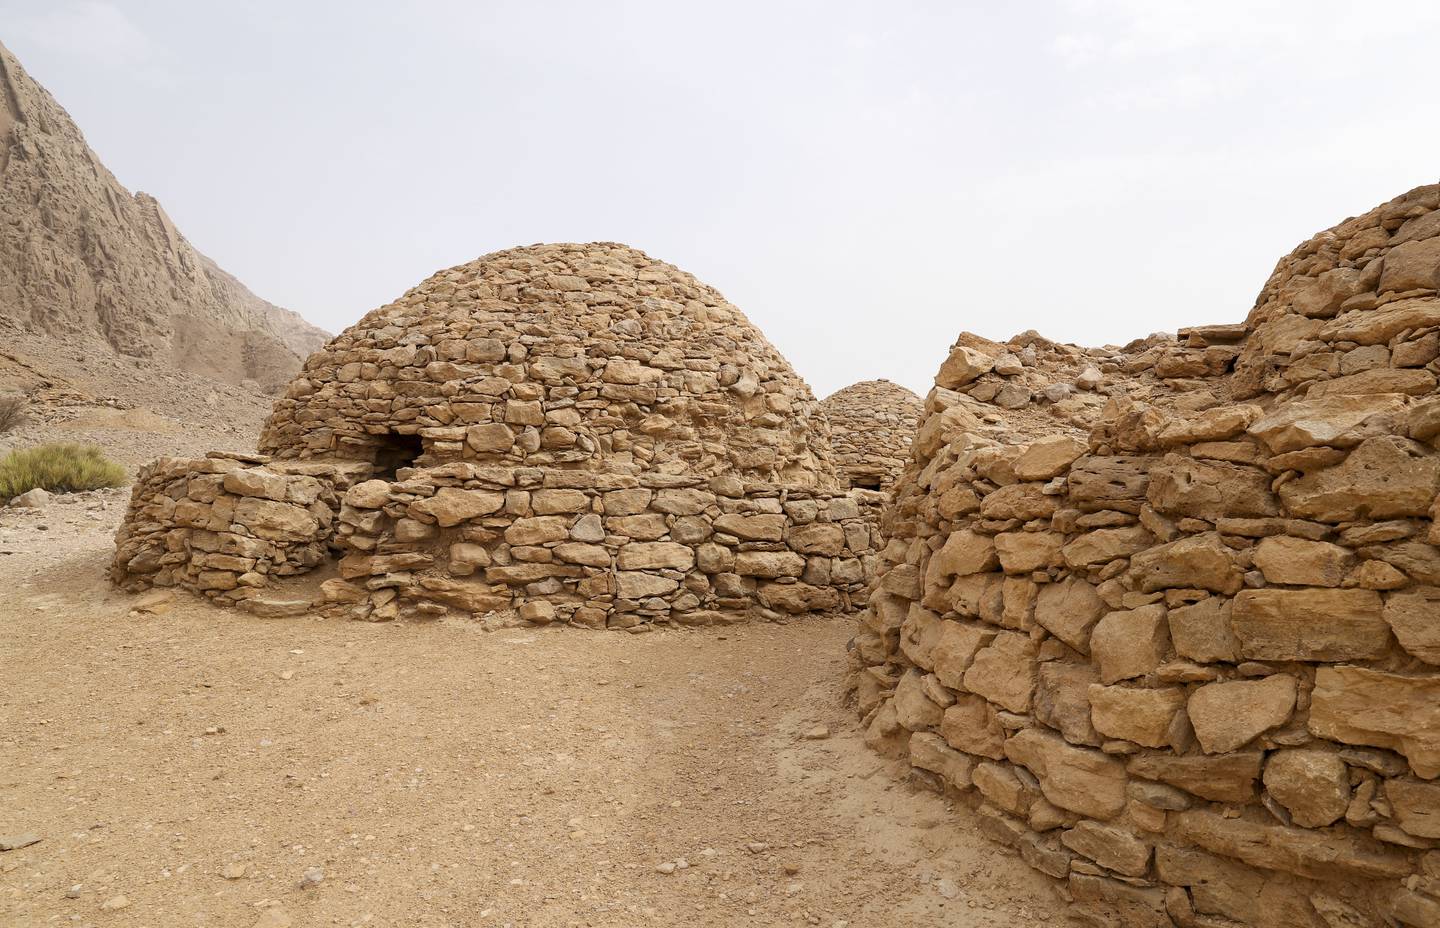 The 5,000-year-old beehive-shaped Jebel Hafeet Tombs were named on the Unesco World Heritage List in 2011.